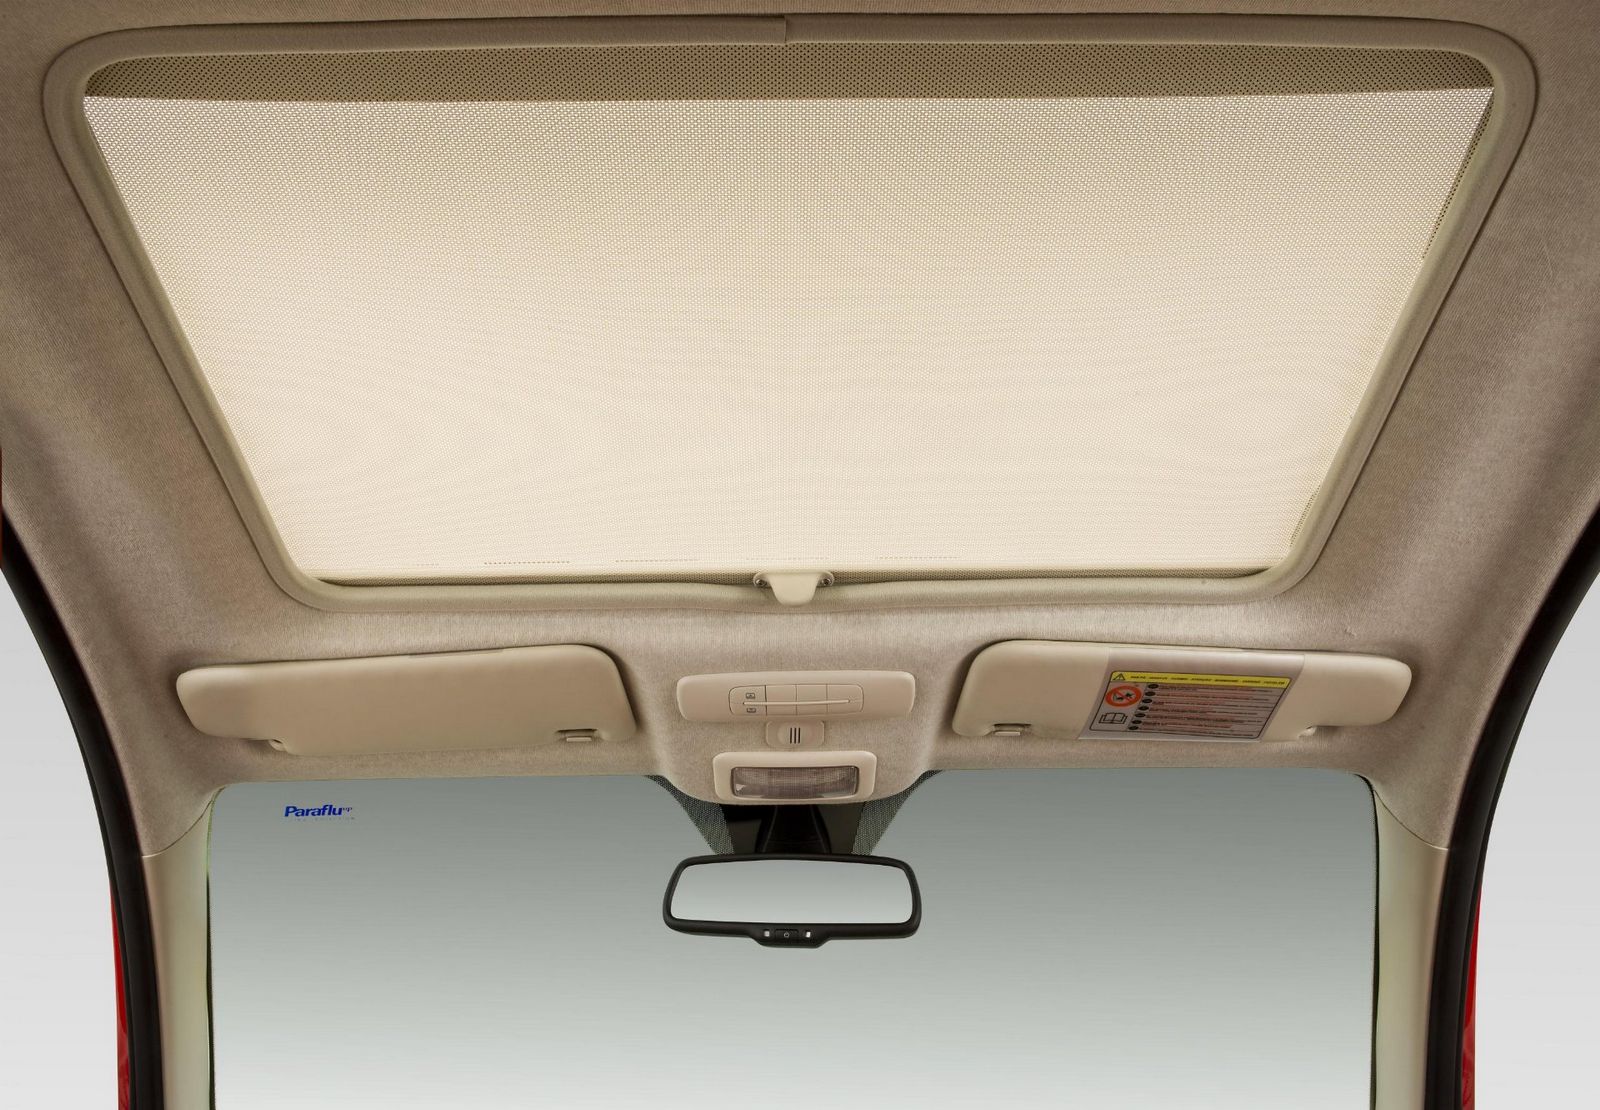 A sunshade is provided to adjust the light intensity inside the car